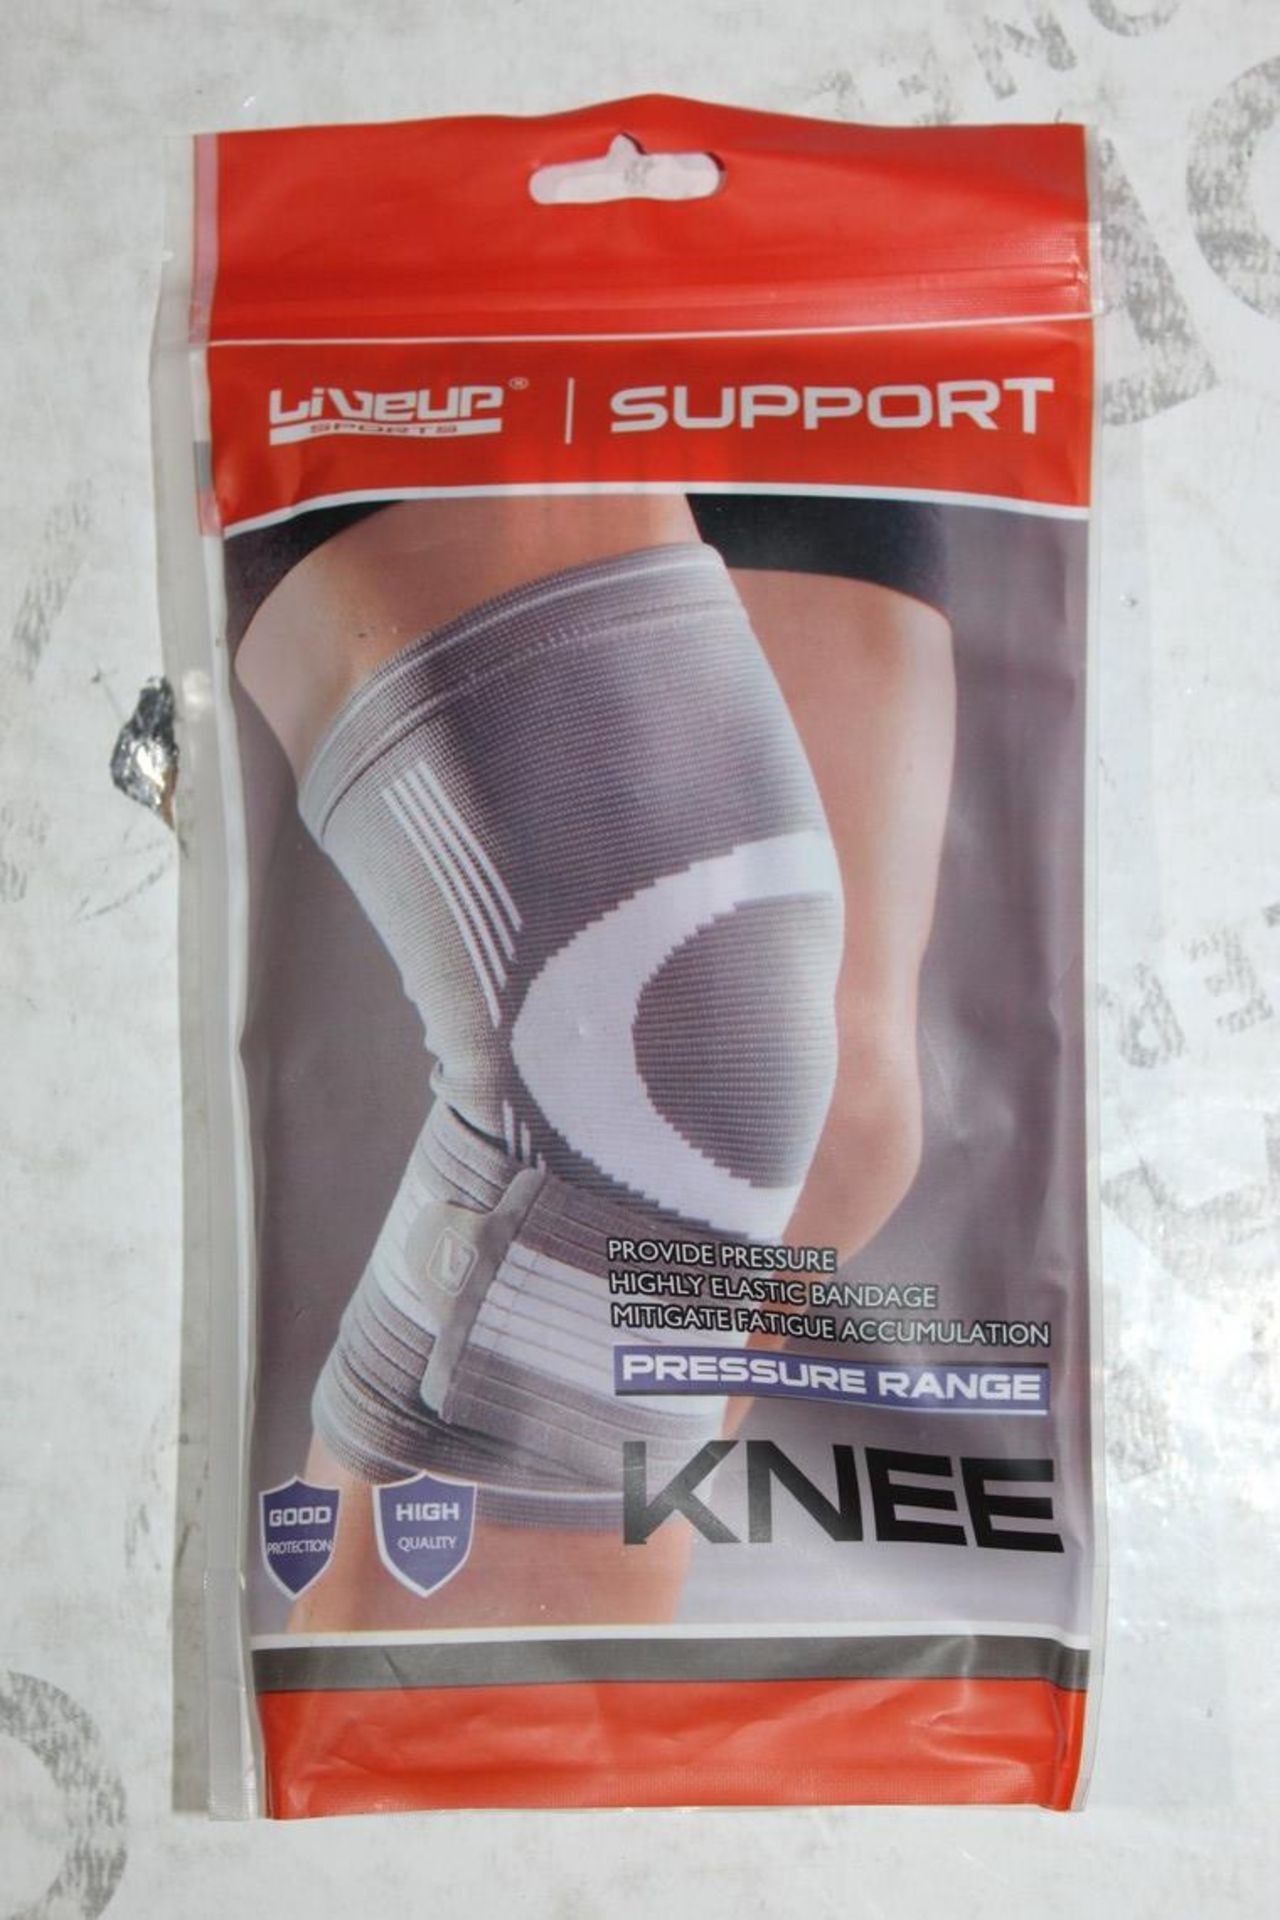 Assorted Brand New Live Up Sports Pressure Range Knee and Elbow Supports in Assorted Sizes